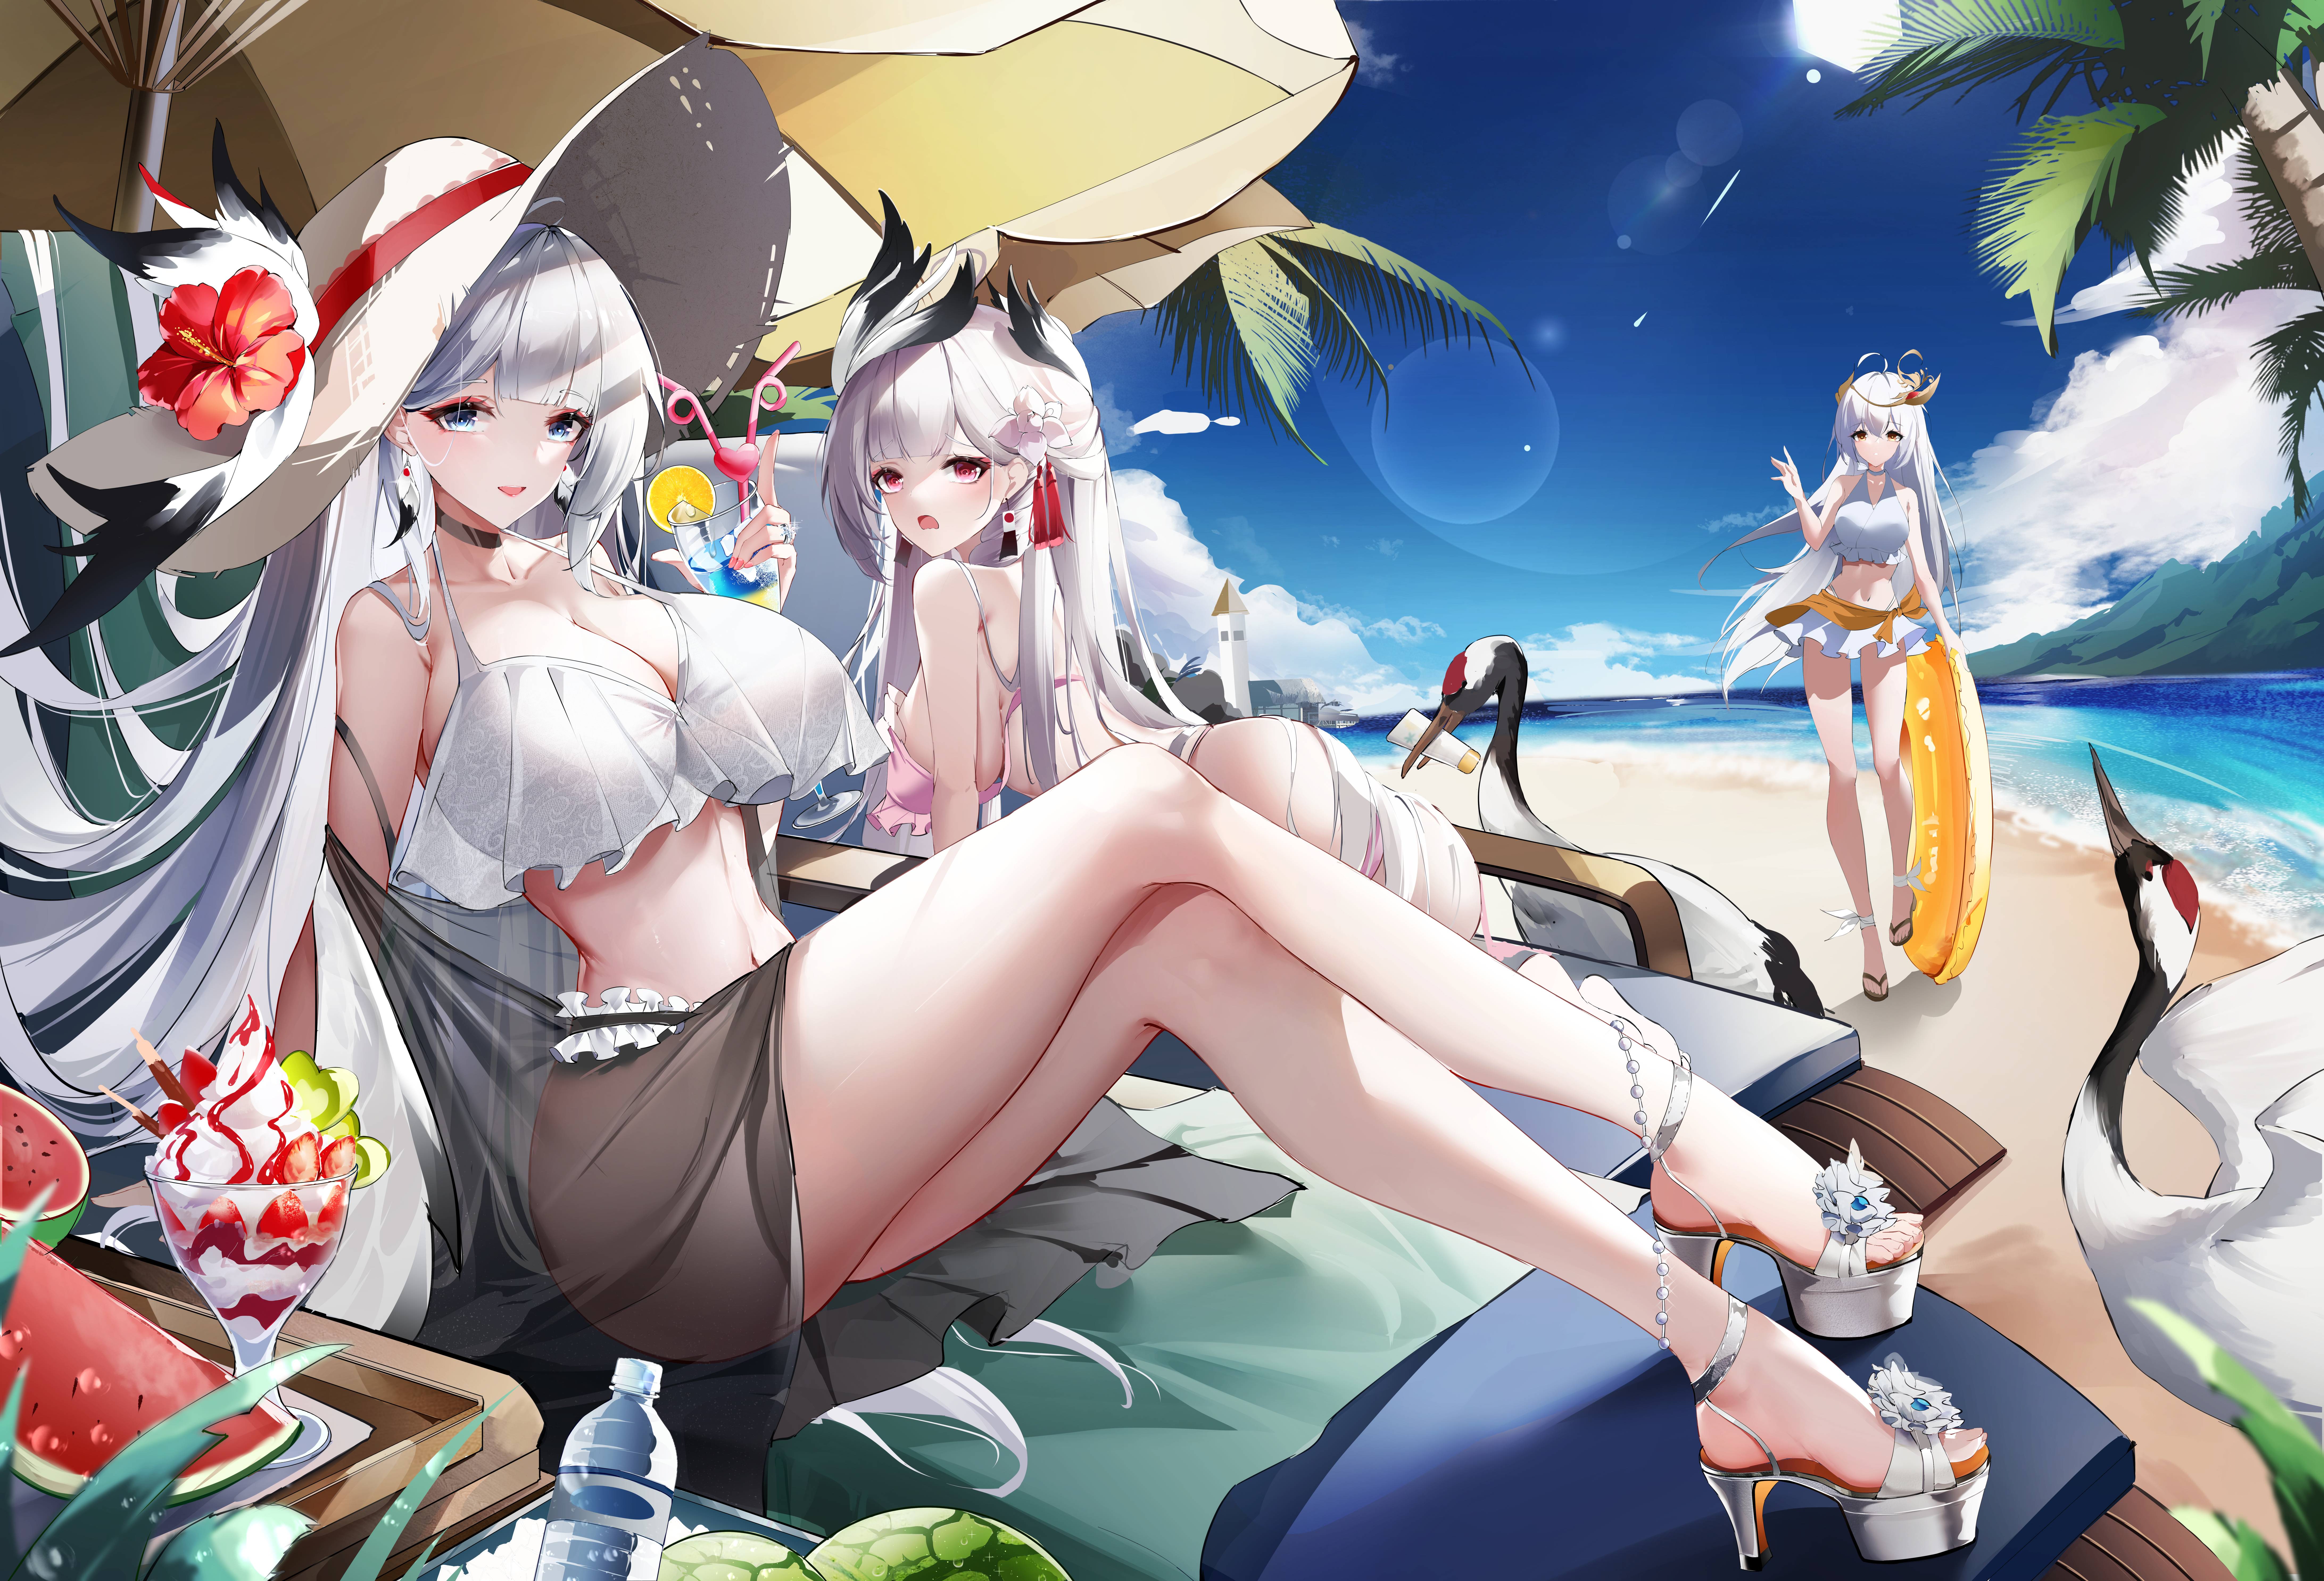 Anime 8735x5941 anime anime girls swimwear straw hat hat watermelons geese big boobs floater water beach ice cream water bottle legs crossed heels silver hair umbrella hibiscus cocktails palm trees parasol sunbed cleavage